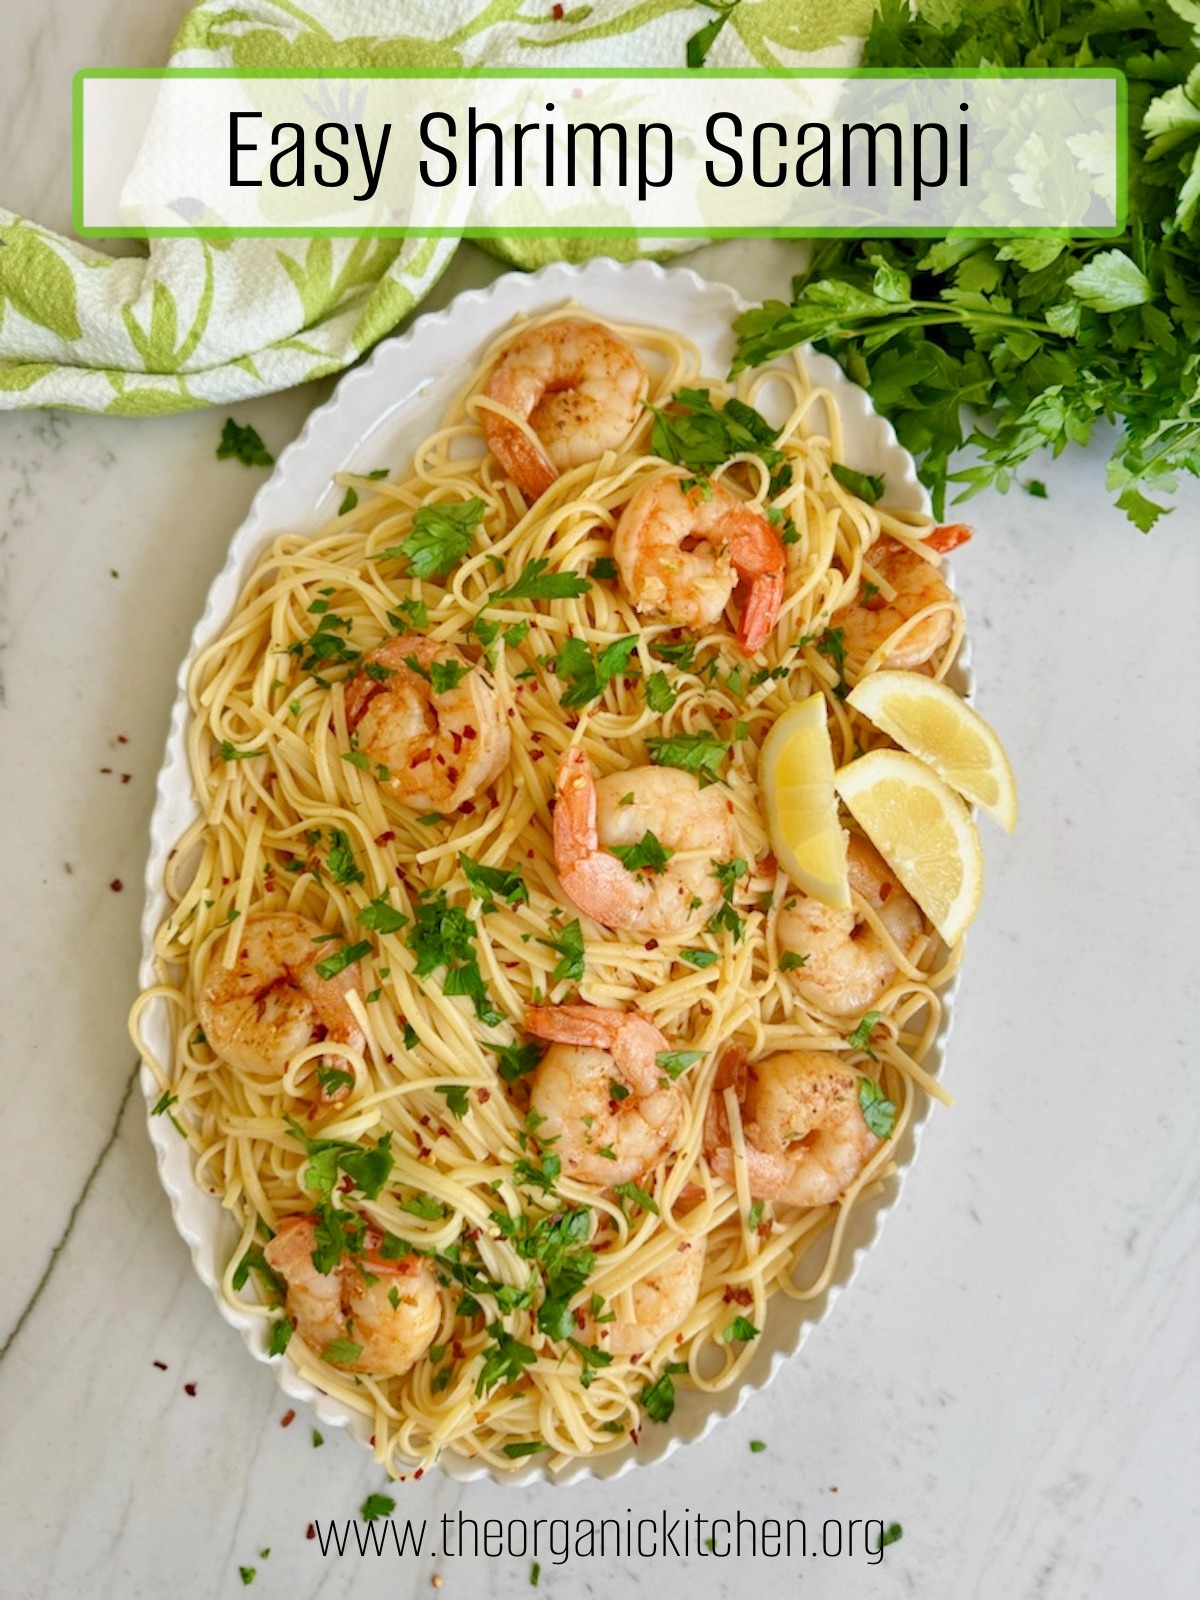 A while platter spilling over with Easy Shrimp Scampi, green dish towel and parsley in the background